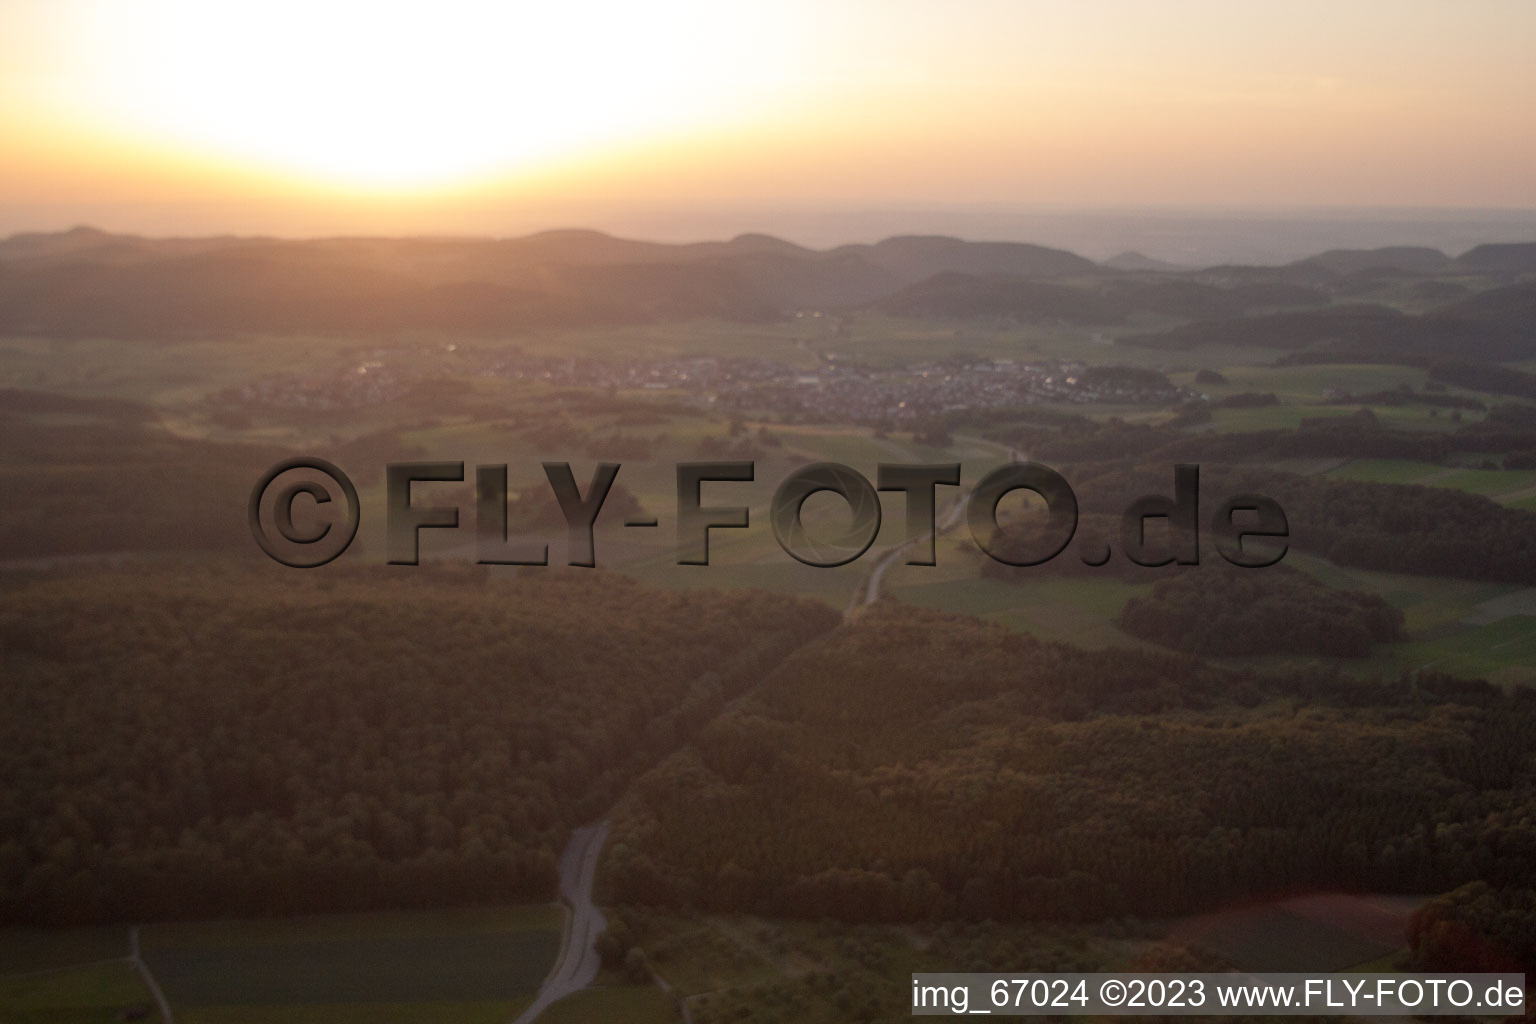 Bernloch in the state Baden-Wuerttemberg, Germany from above